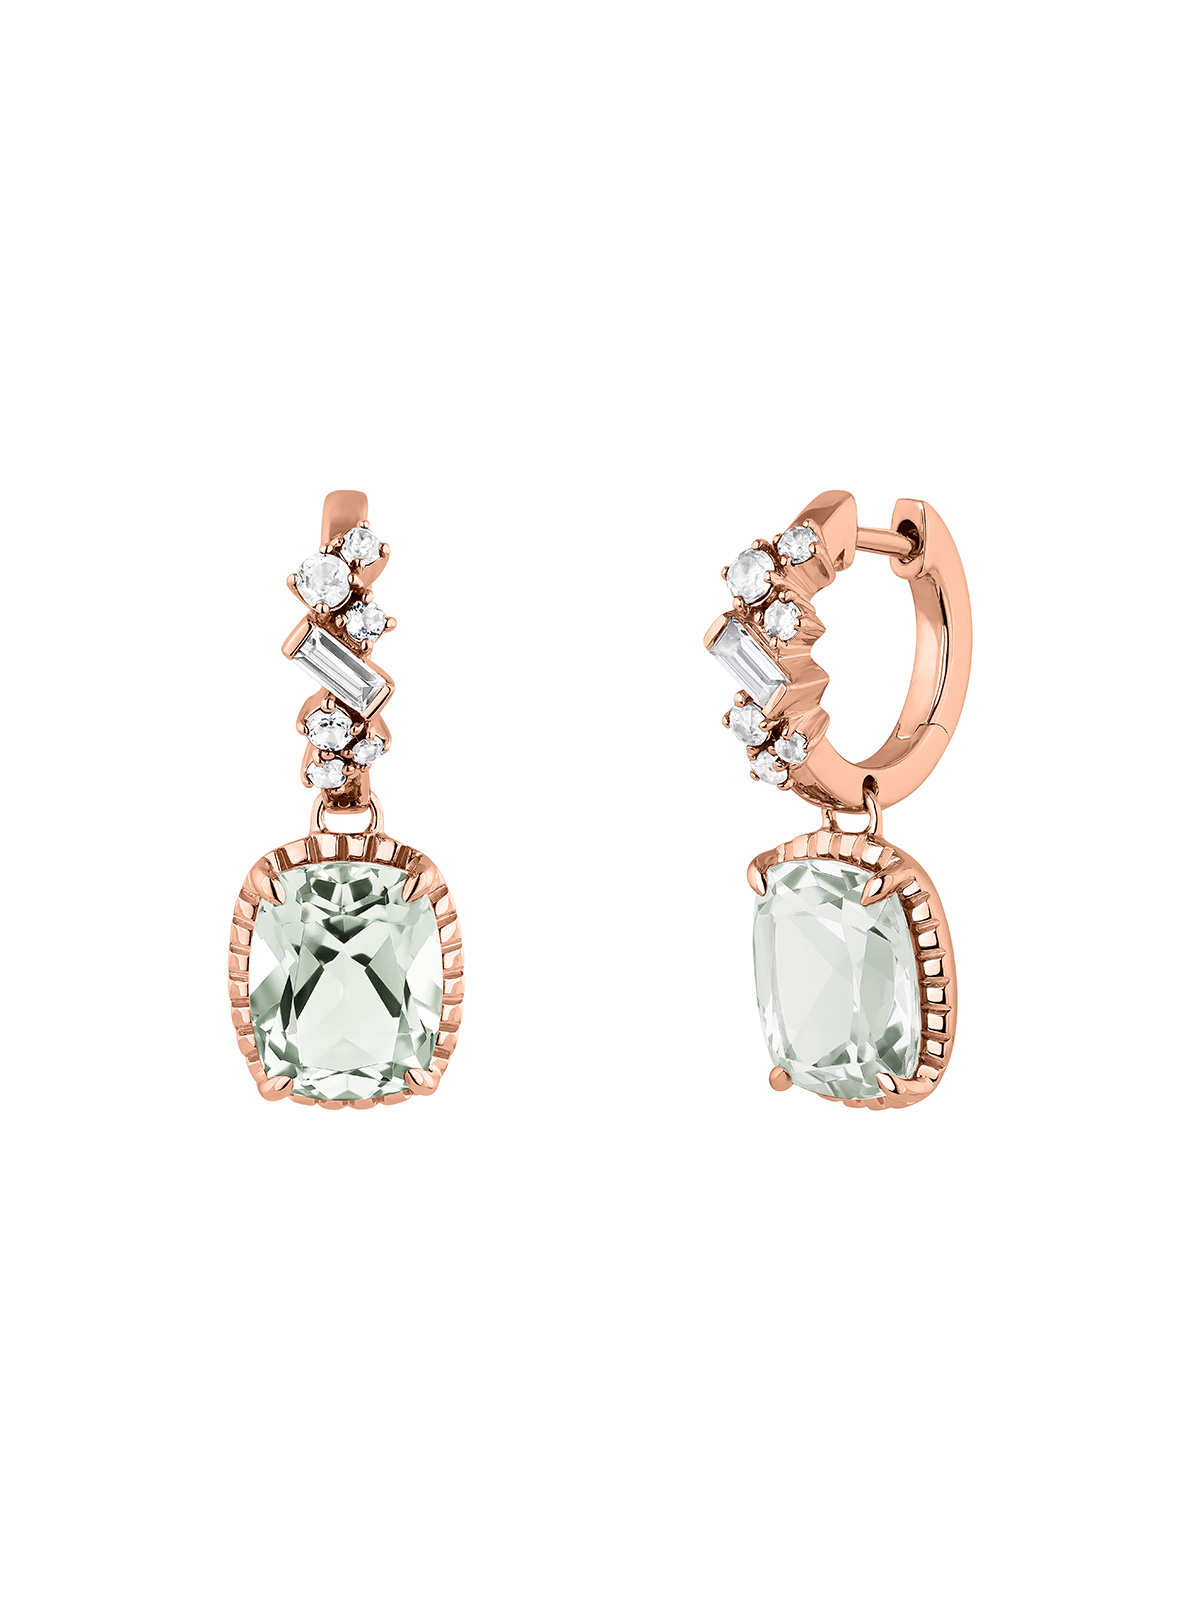 925 Silver hoop earrings bathed in 18K rose gold with green quartz and Swiss blue topaz.